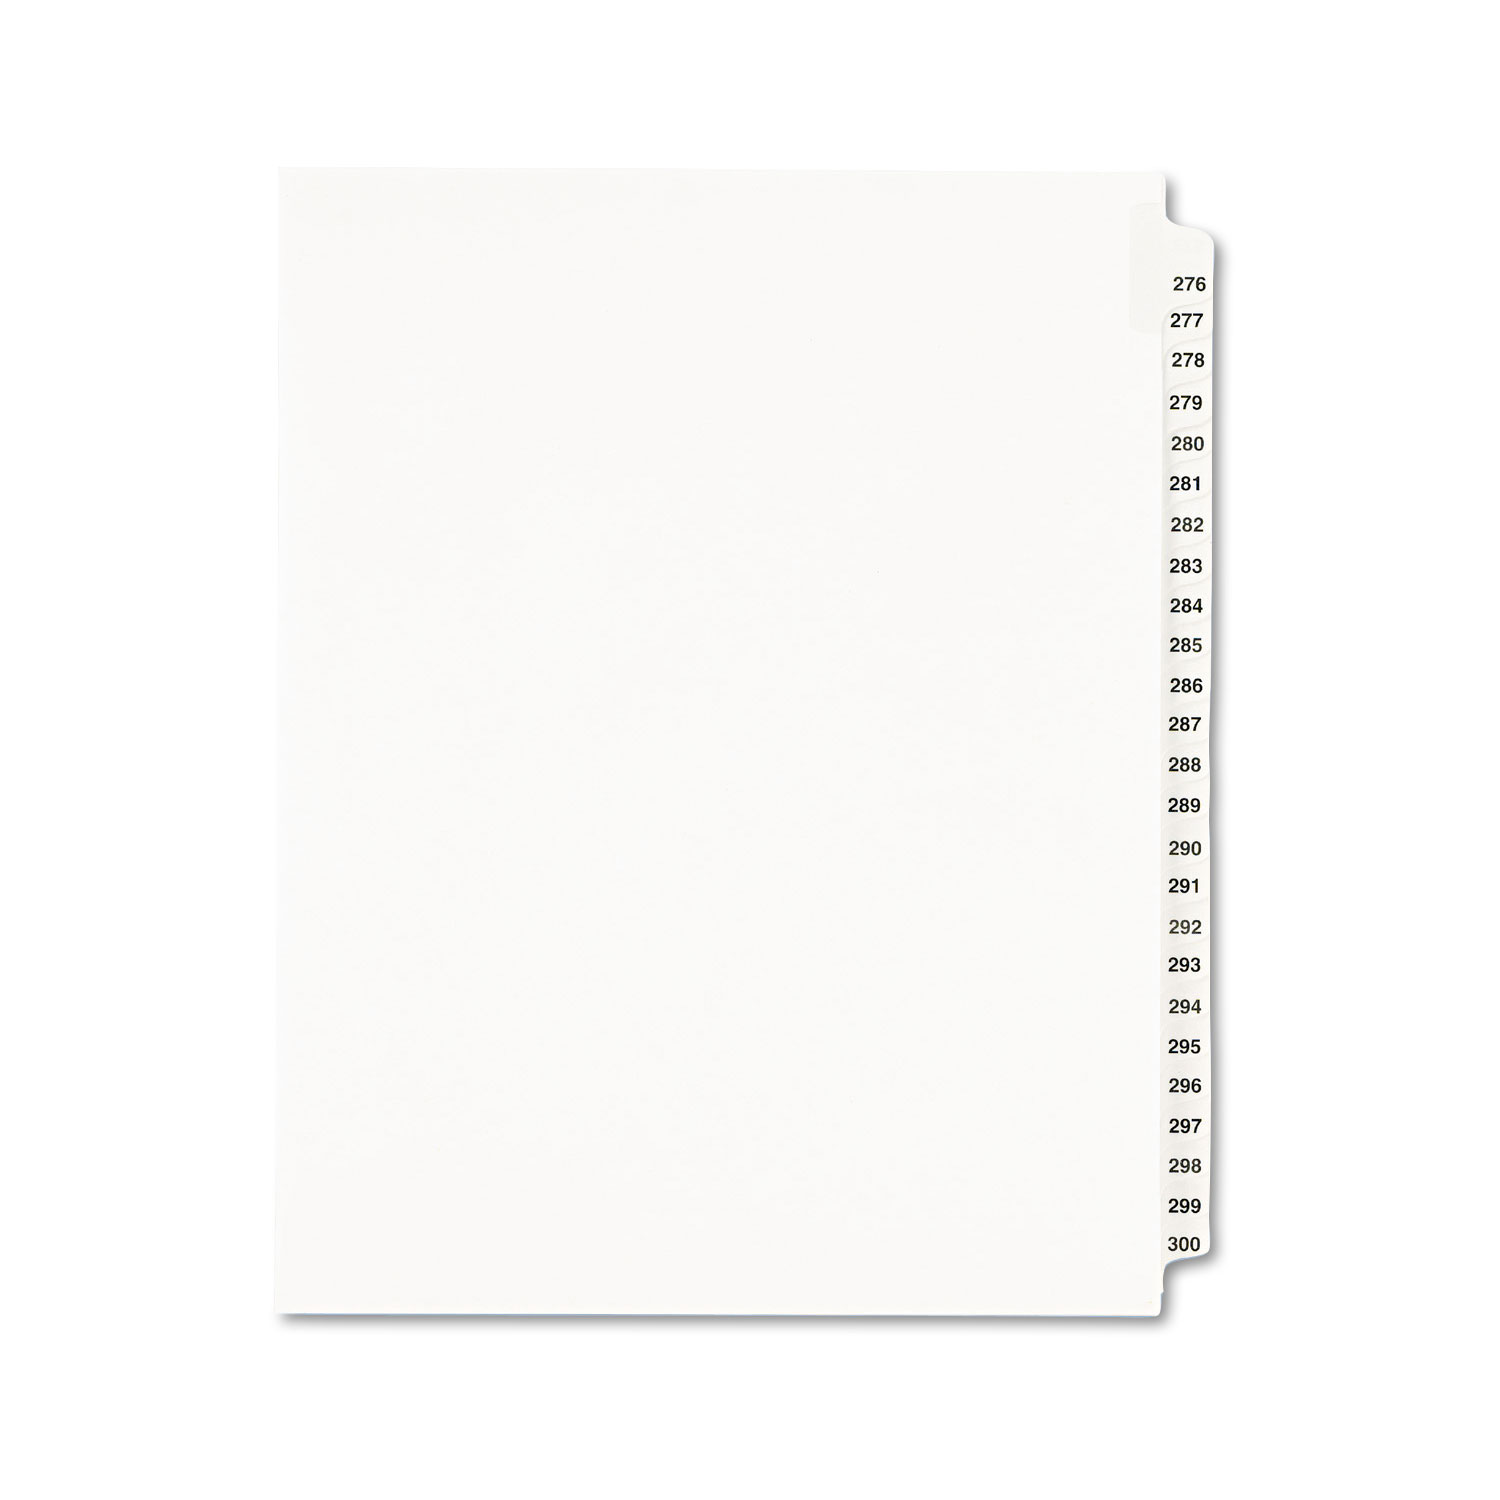  Avery 01341 Preprinted Legal Exhibit Side Tab Index Dividers, Avery Style, 25-Tab, 276 to 300, 11 x 8.5, White, 1 Set (AVE01341) 